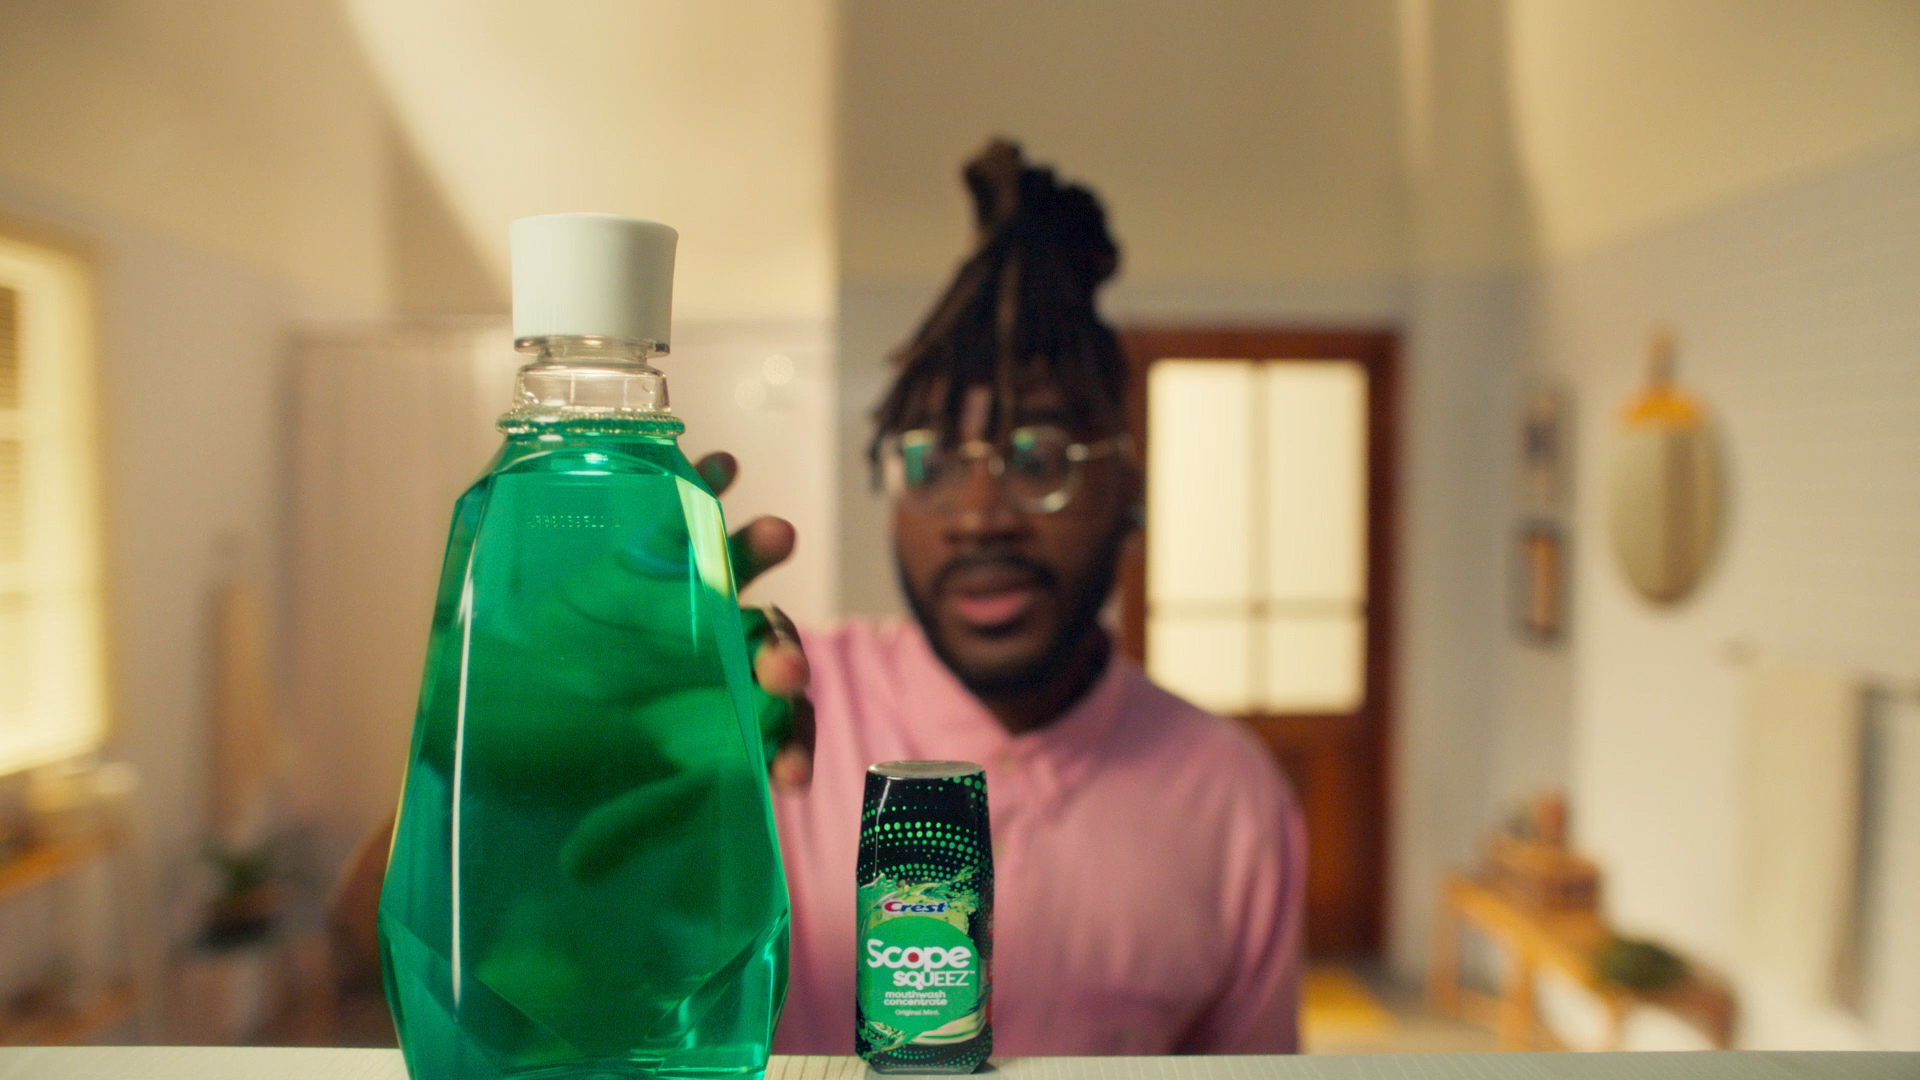 Customize your mouthwash experience with new Scope Squeez mouthwash concentrate. Simply add water and squeez to control your minty intensity. Now available at retailers nationwide.